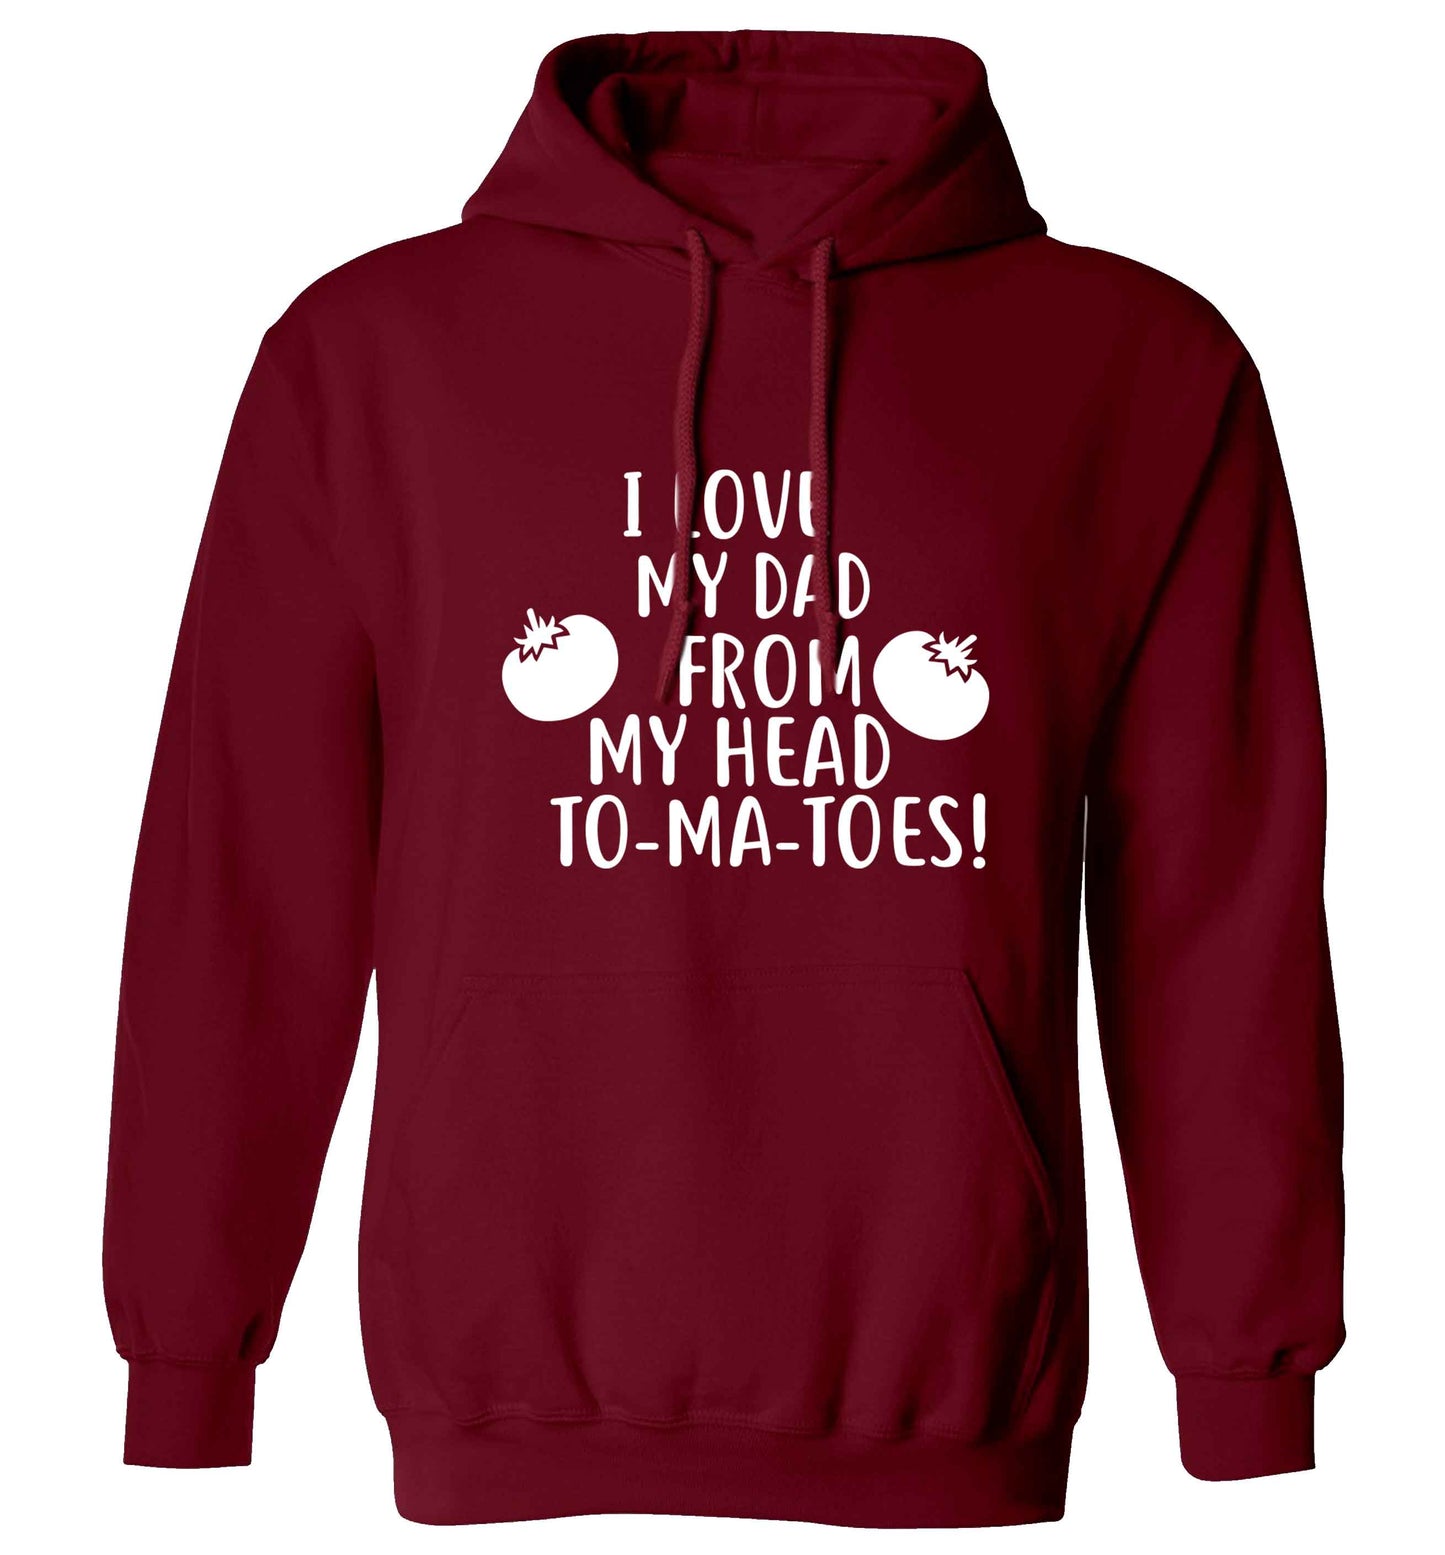 I love my dad from my head to-ma-toes adults unisex maroon hoodie 2XL